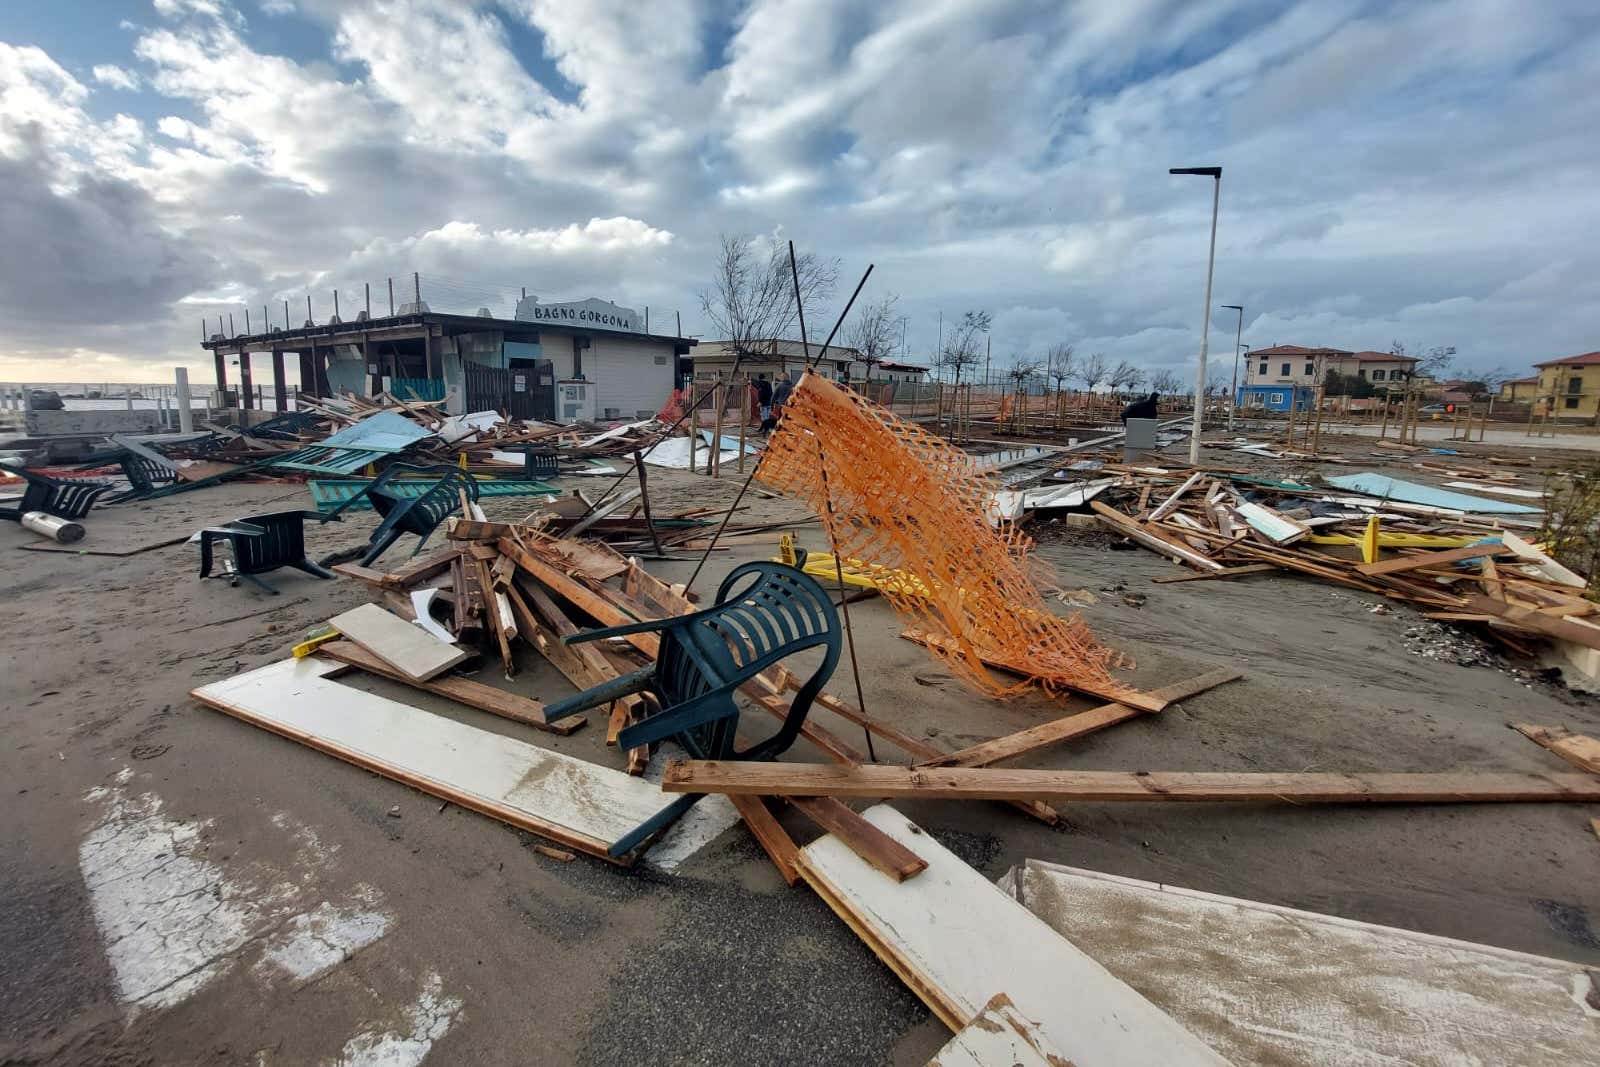 The seafront in Marina di Pisa in Tuscany, Italy covered with debris following Storm Ciaran (Emma Thom/PA)